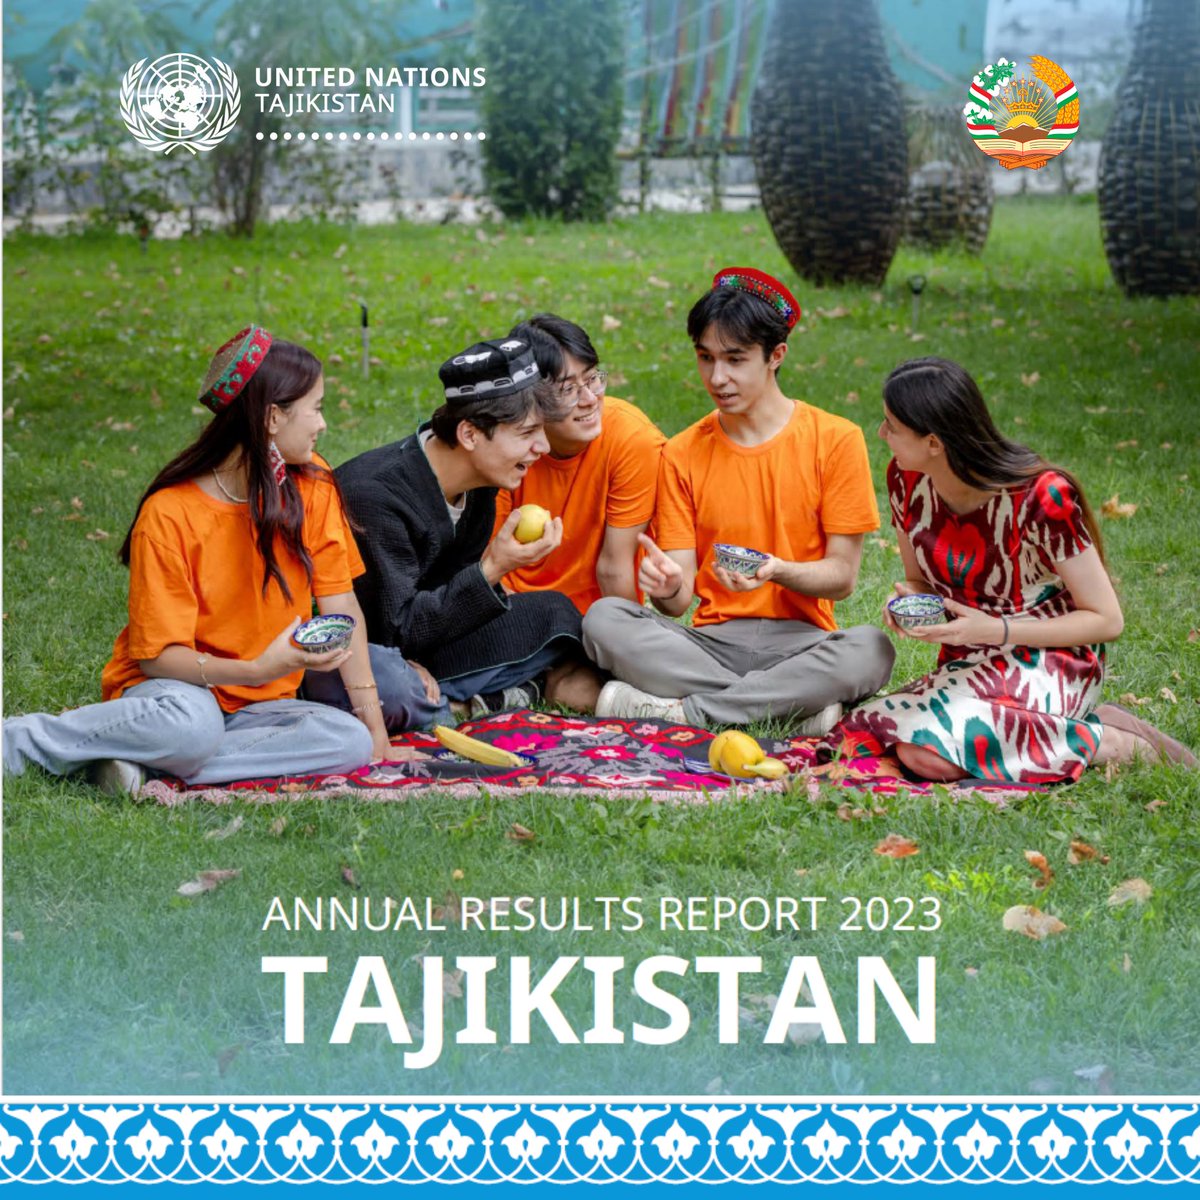 Delighted to share our Annual Results Report for 2023 displaying the collective actions of the UN agencies supporting #Tajikistan to improve the lives of people. Read about the major results of #UNSDCF for 2023 achieved in partnership with #TajikGov & key partners.